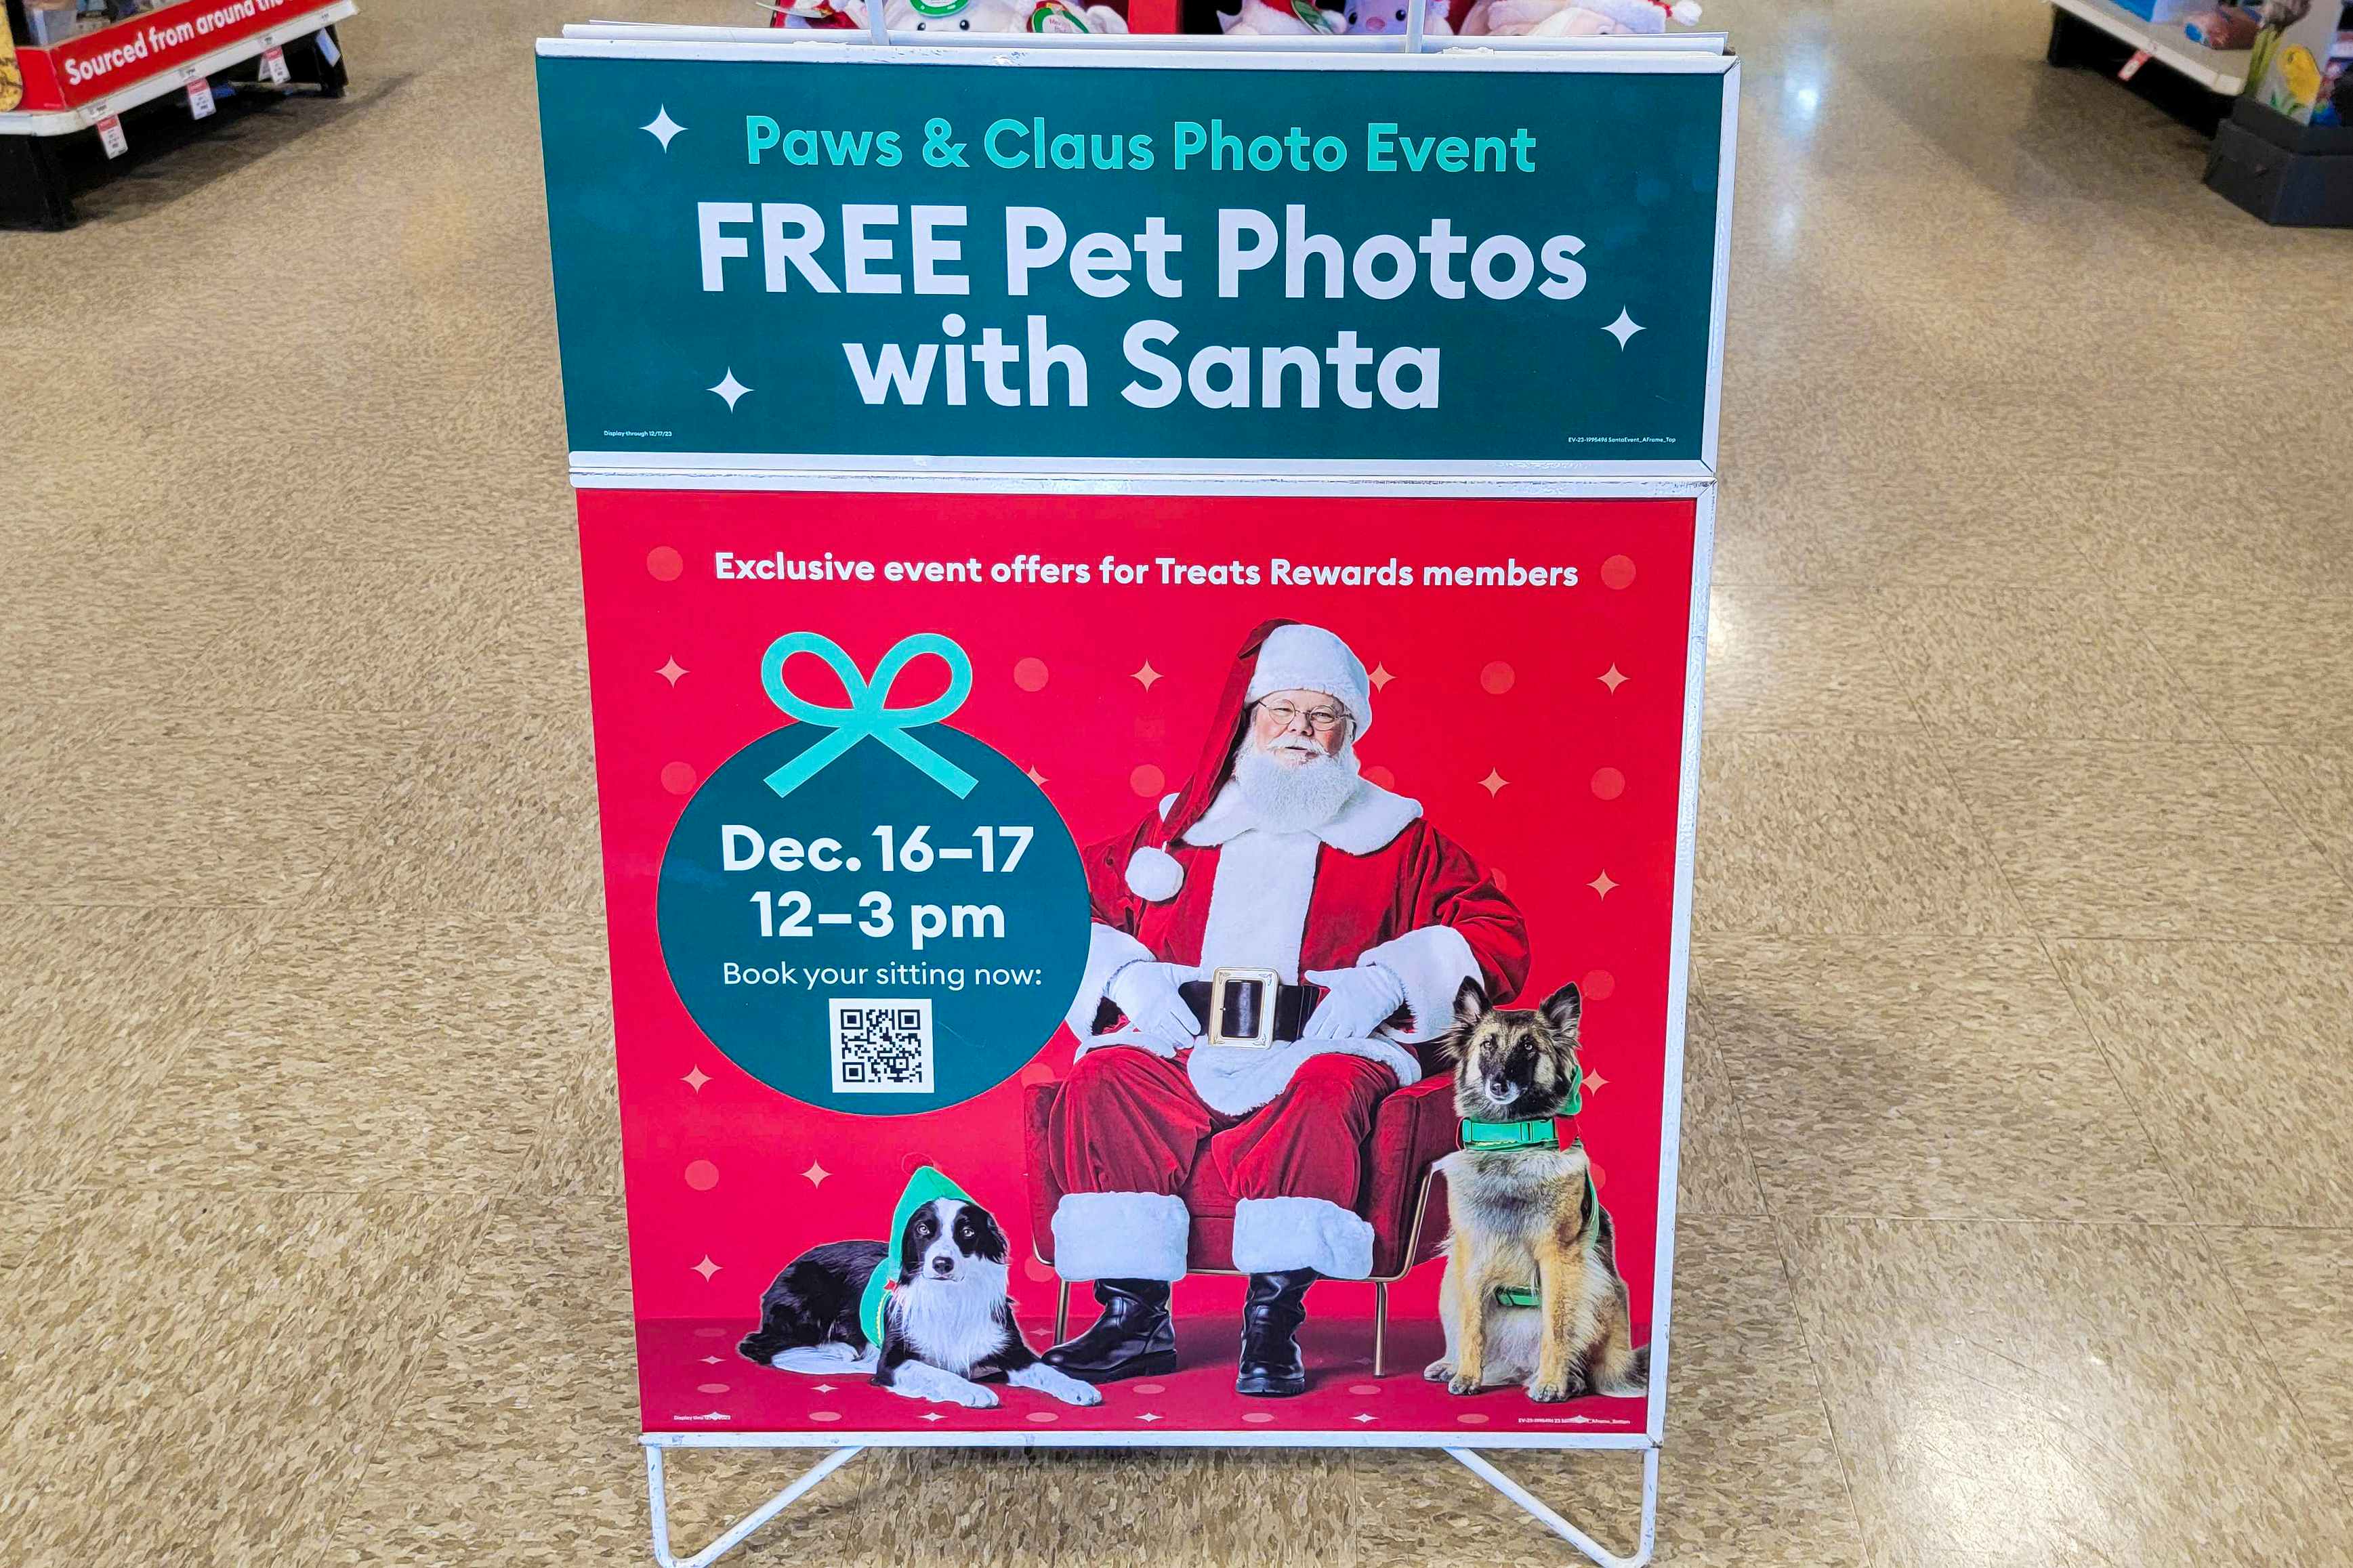 a sign for Petsmarts free pet photos with Santa